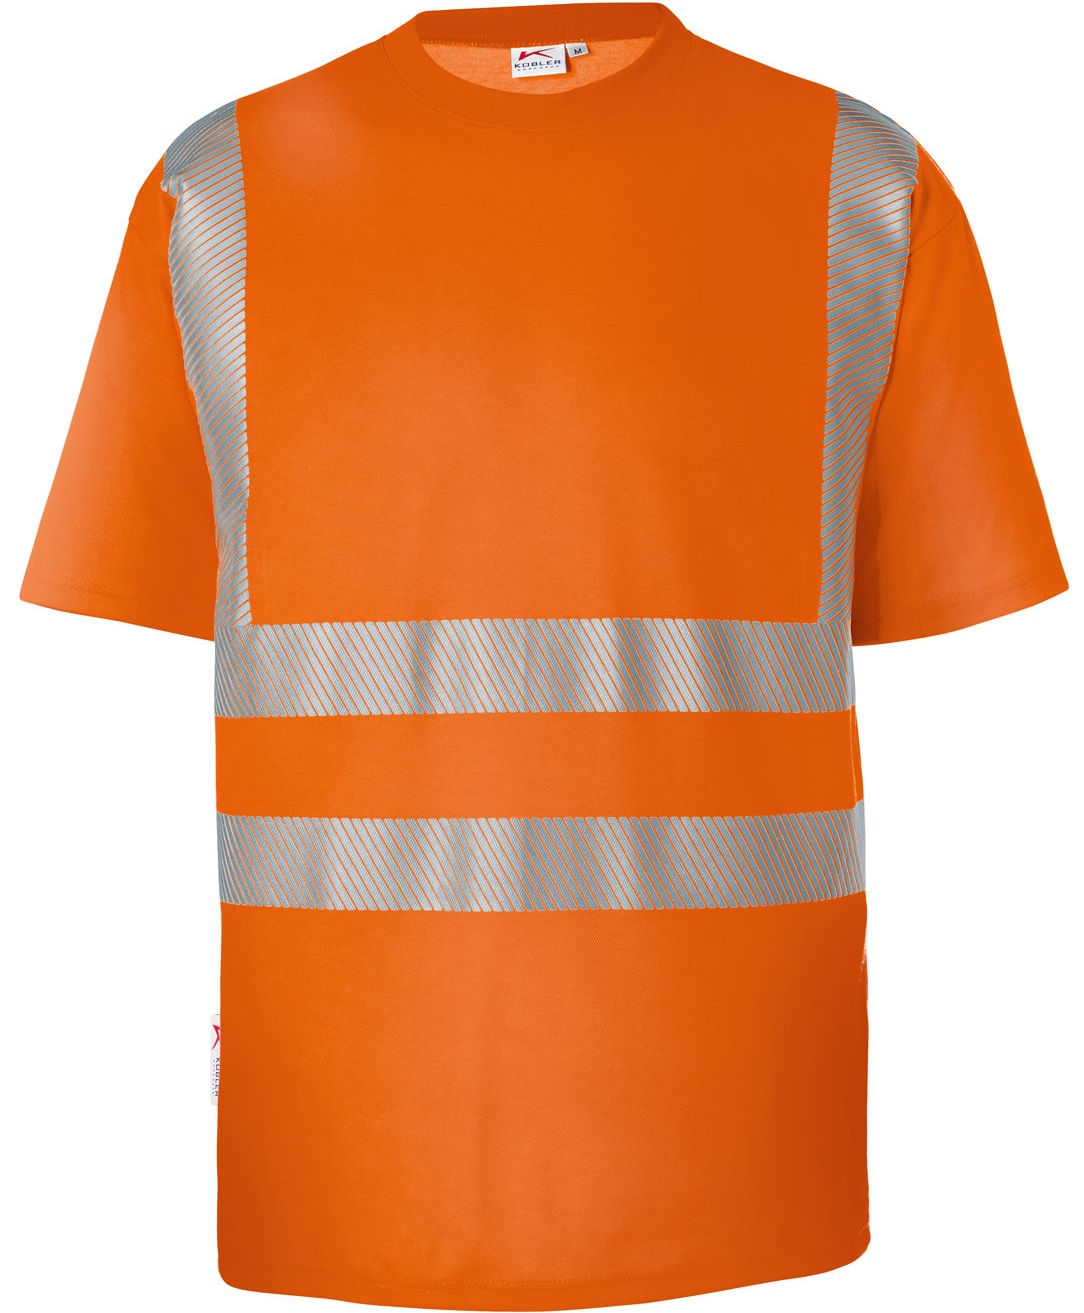 Warning | By T-shirt - polo REFLECTIQ T-shirts Kübler protection | profession 2 5043 8227 shirts | PSA safety Clever-AS-Technik | Hi & Vis Industrial